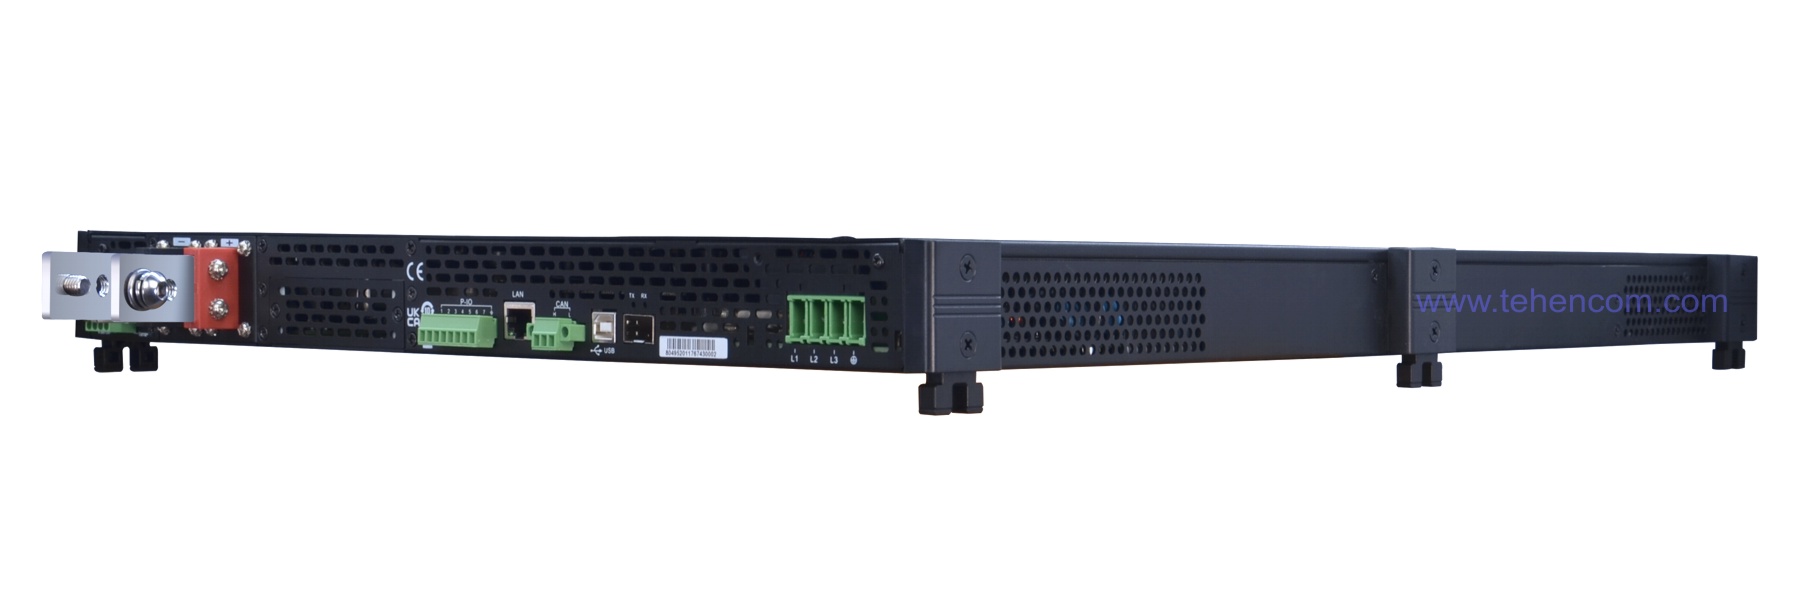 Typical ITECH IT-M3900C series power supply (1U height, side view 3)